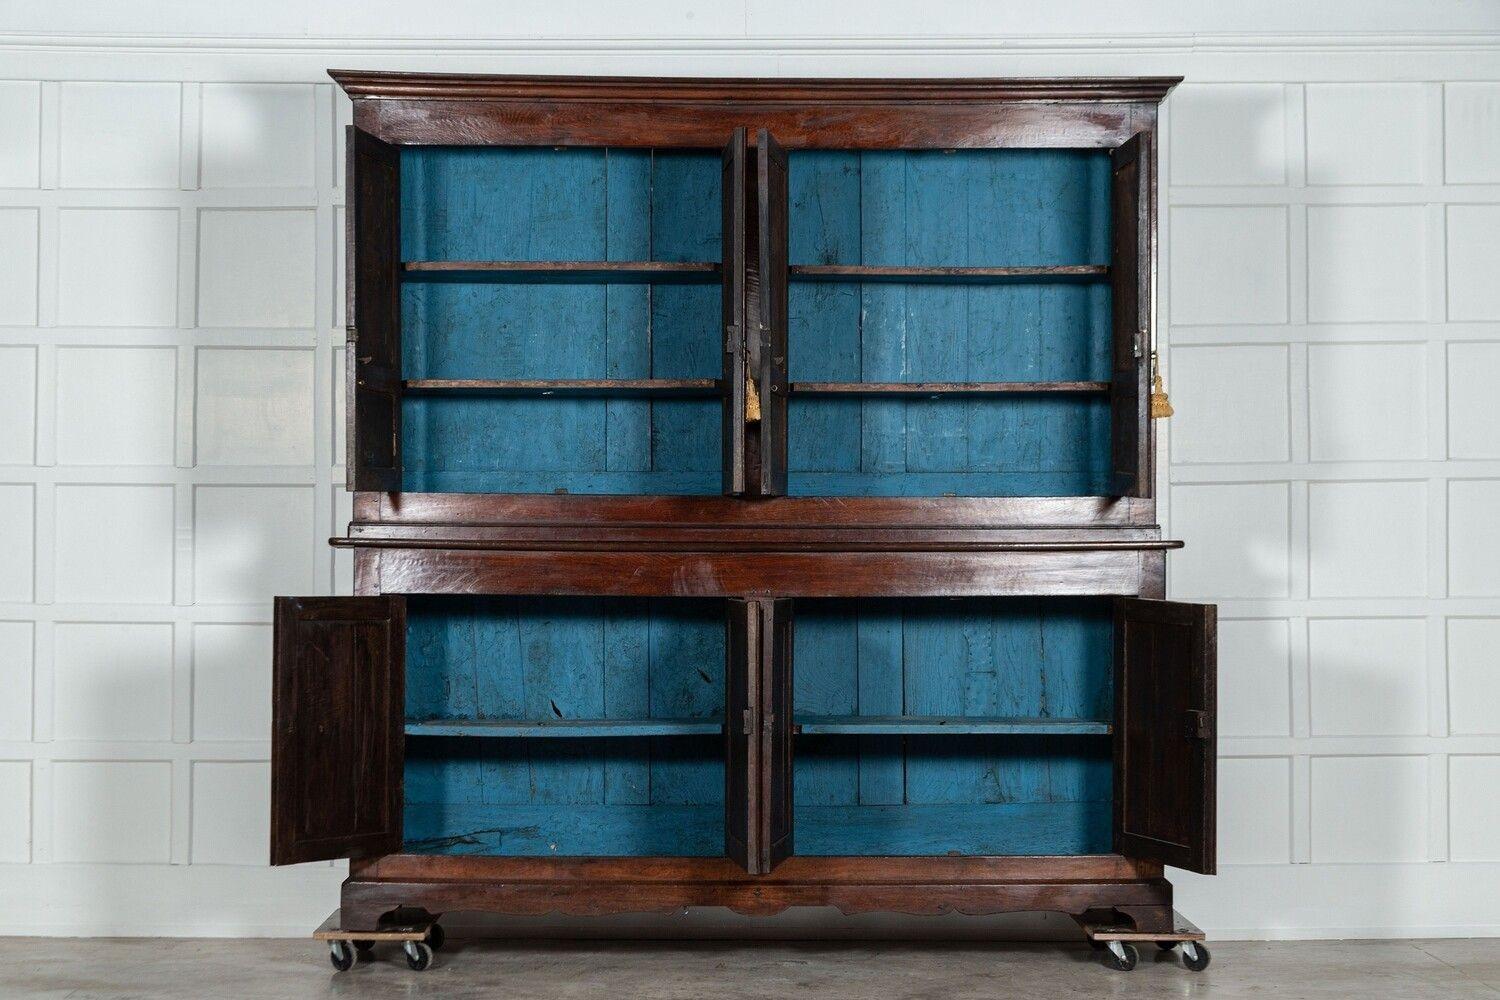 circa 1790
Large 19thC George III English Oak & Fruitwood Housekeepers Cupboard
Exceptional patination and colour
sku 1576
Base W229 x D50 x H105cm
Top W230 x D45 x H125cm
Together W230 x D50 x H230cm